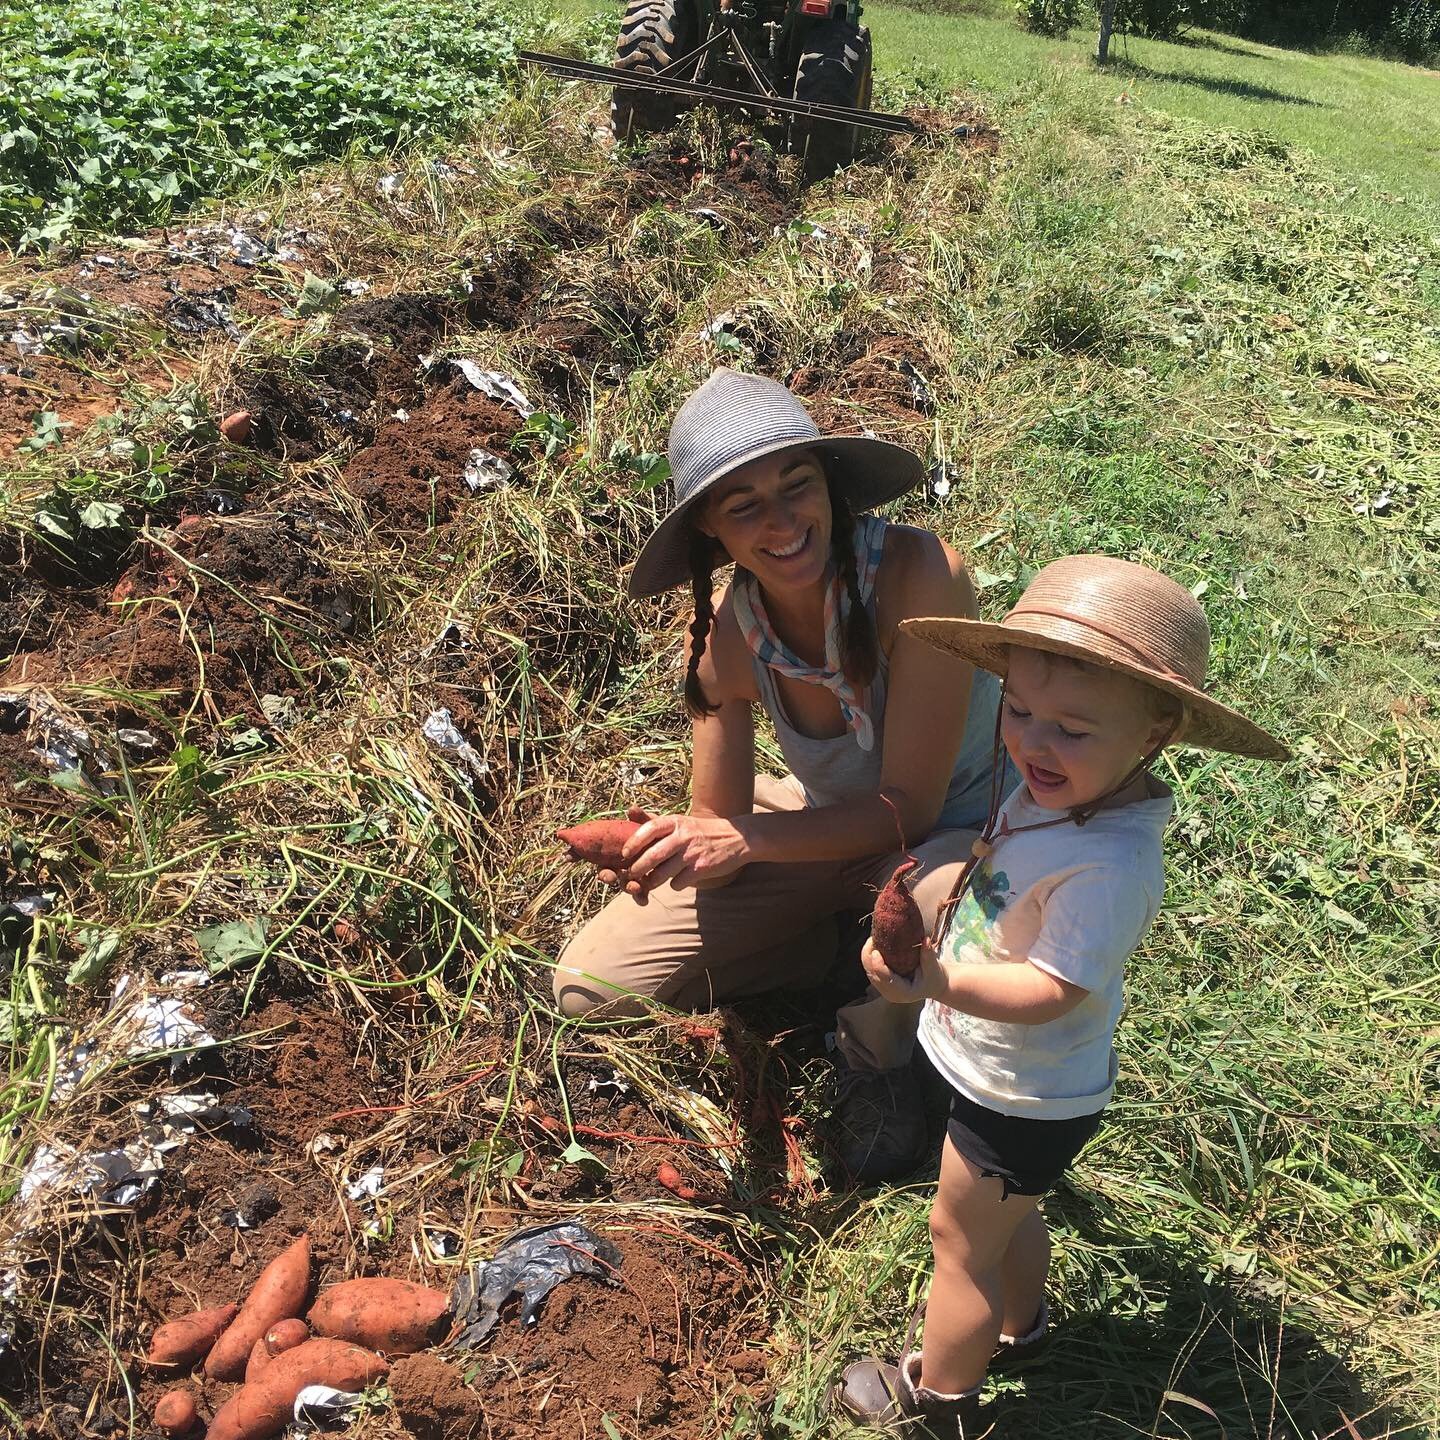 Previous Happening: Farm Happenings for second week of September, 2019